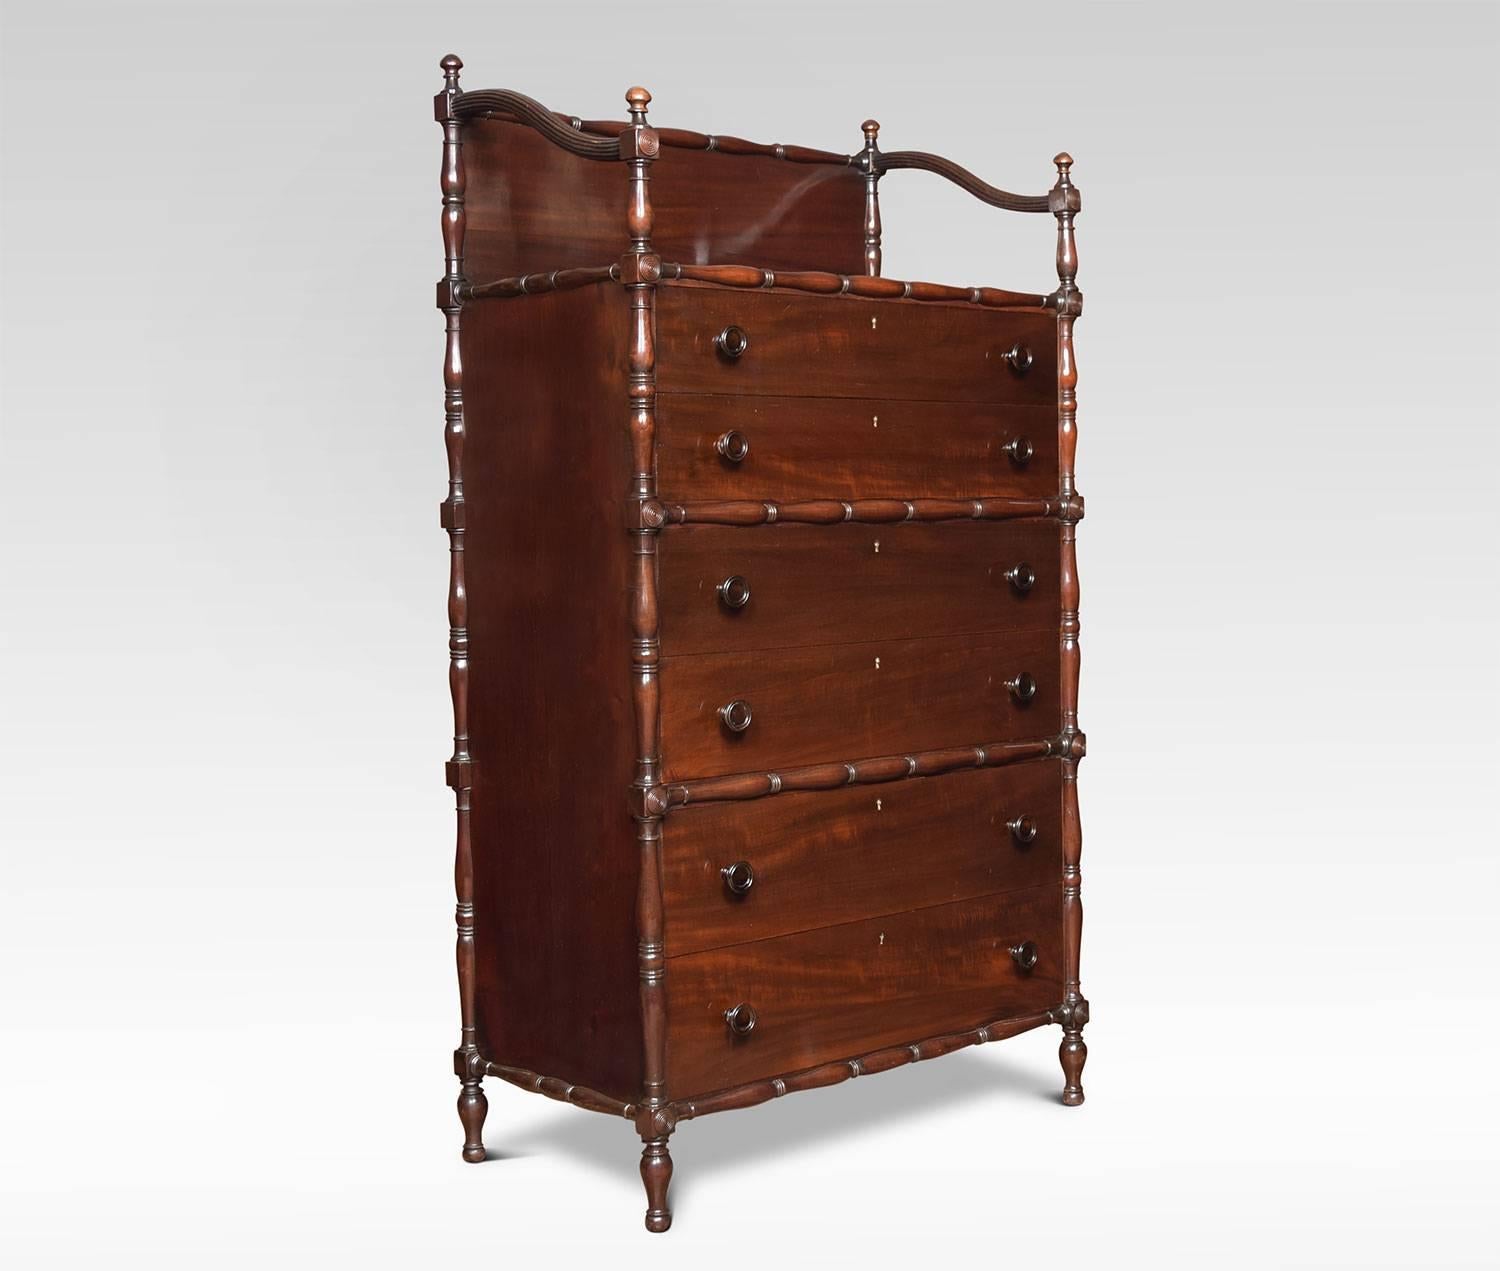 Mahogany chest of draws the rectangular top with spindle gallery over six long drawers with paneled fronts. Flanked by faux bamboo columns all raised up on turned legs.
Dimensions:
Height 59.5 inches
Width 32.5 inches
Depth 18 inches.